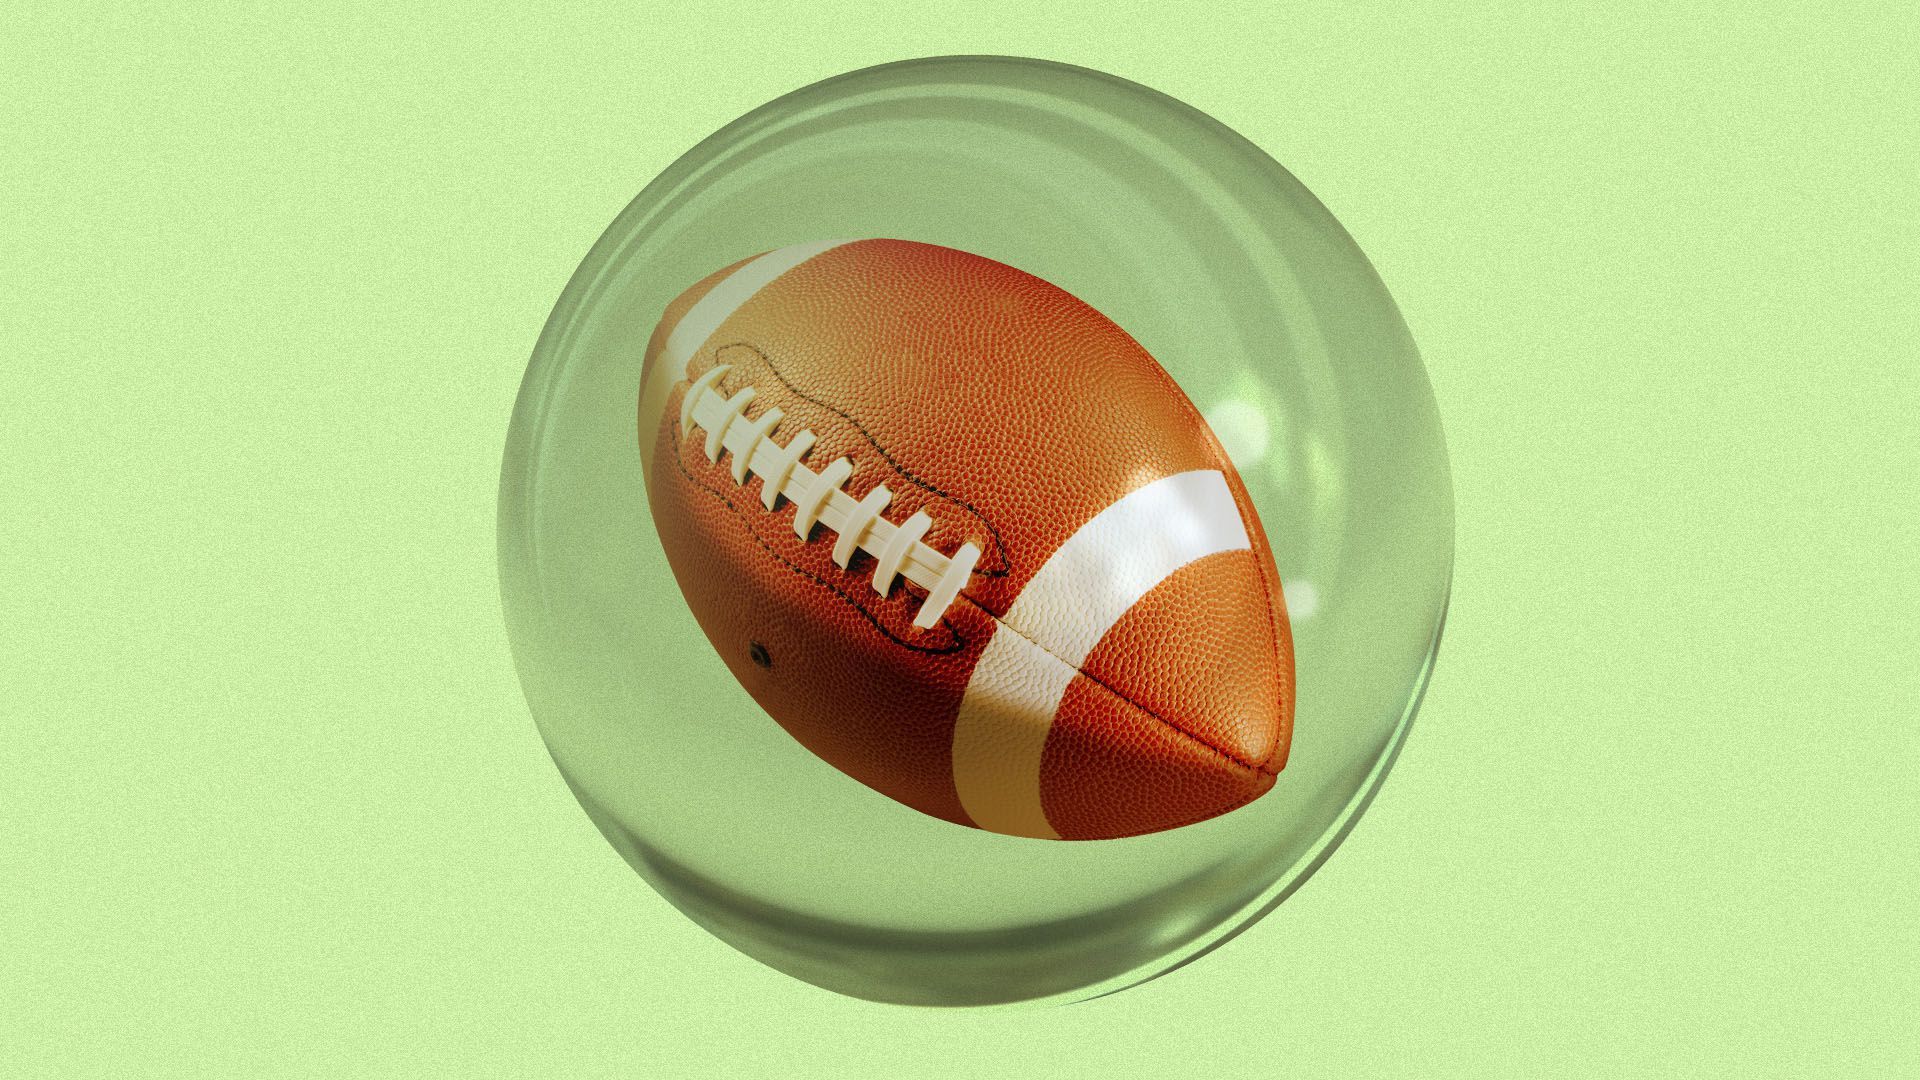 Illustration of football in a bubble